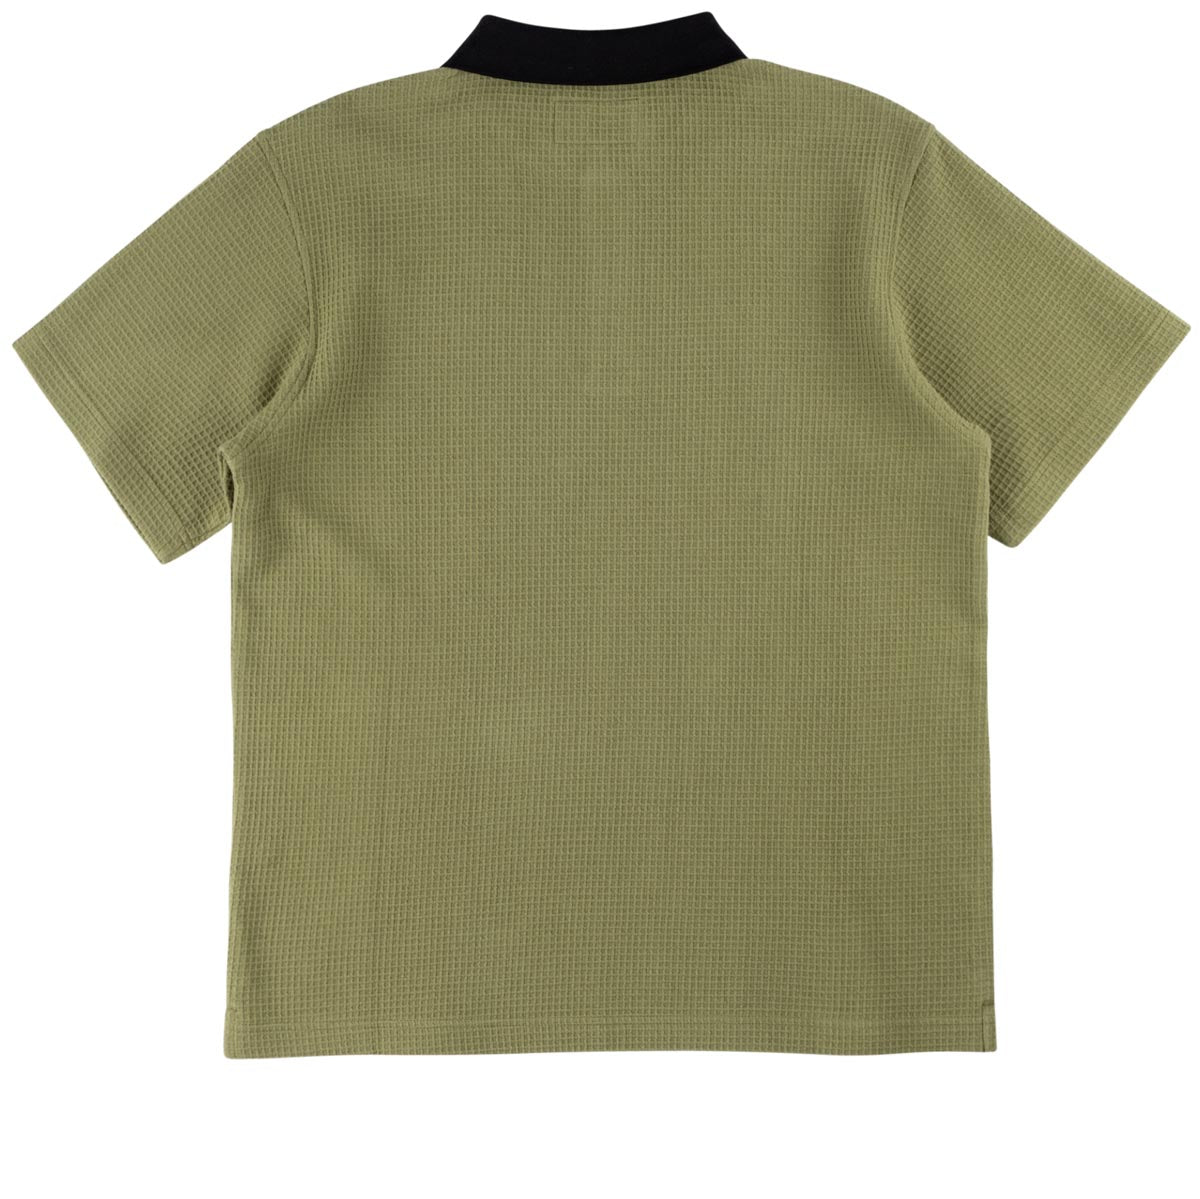 Welcome Sharp Thermal Polo Shirt - Olive image 3